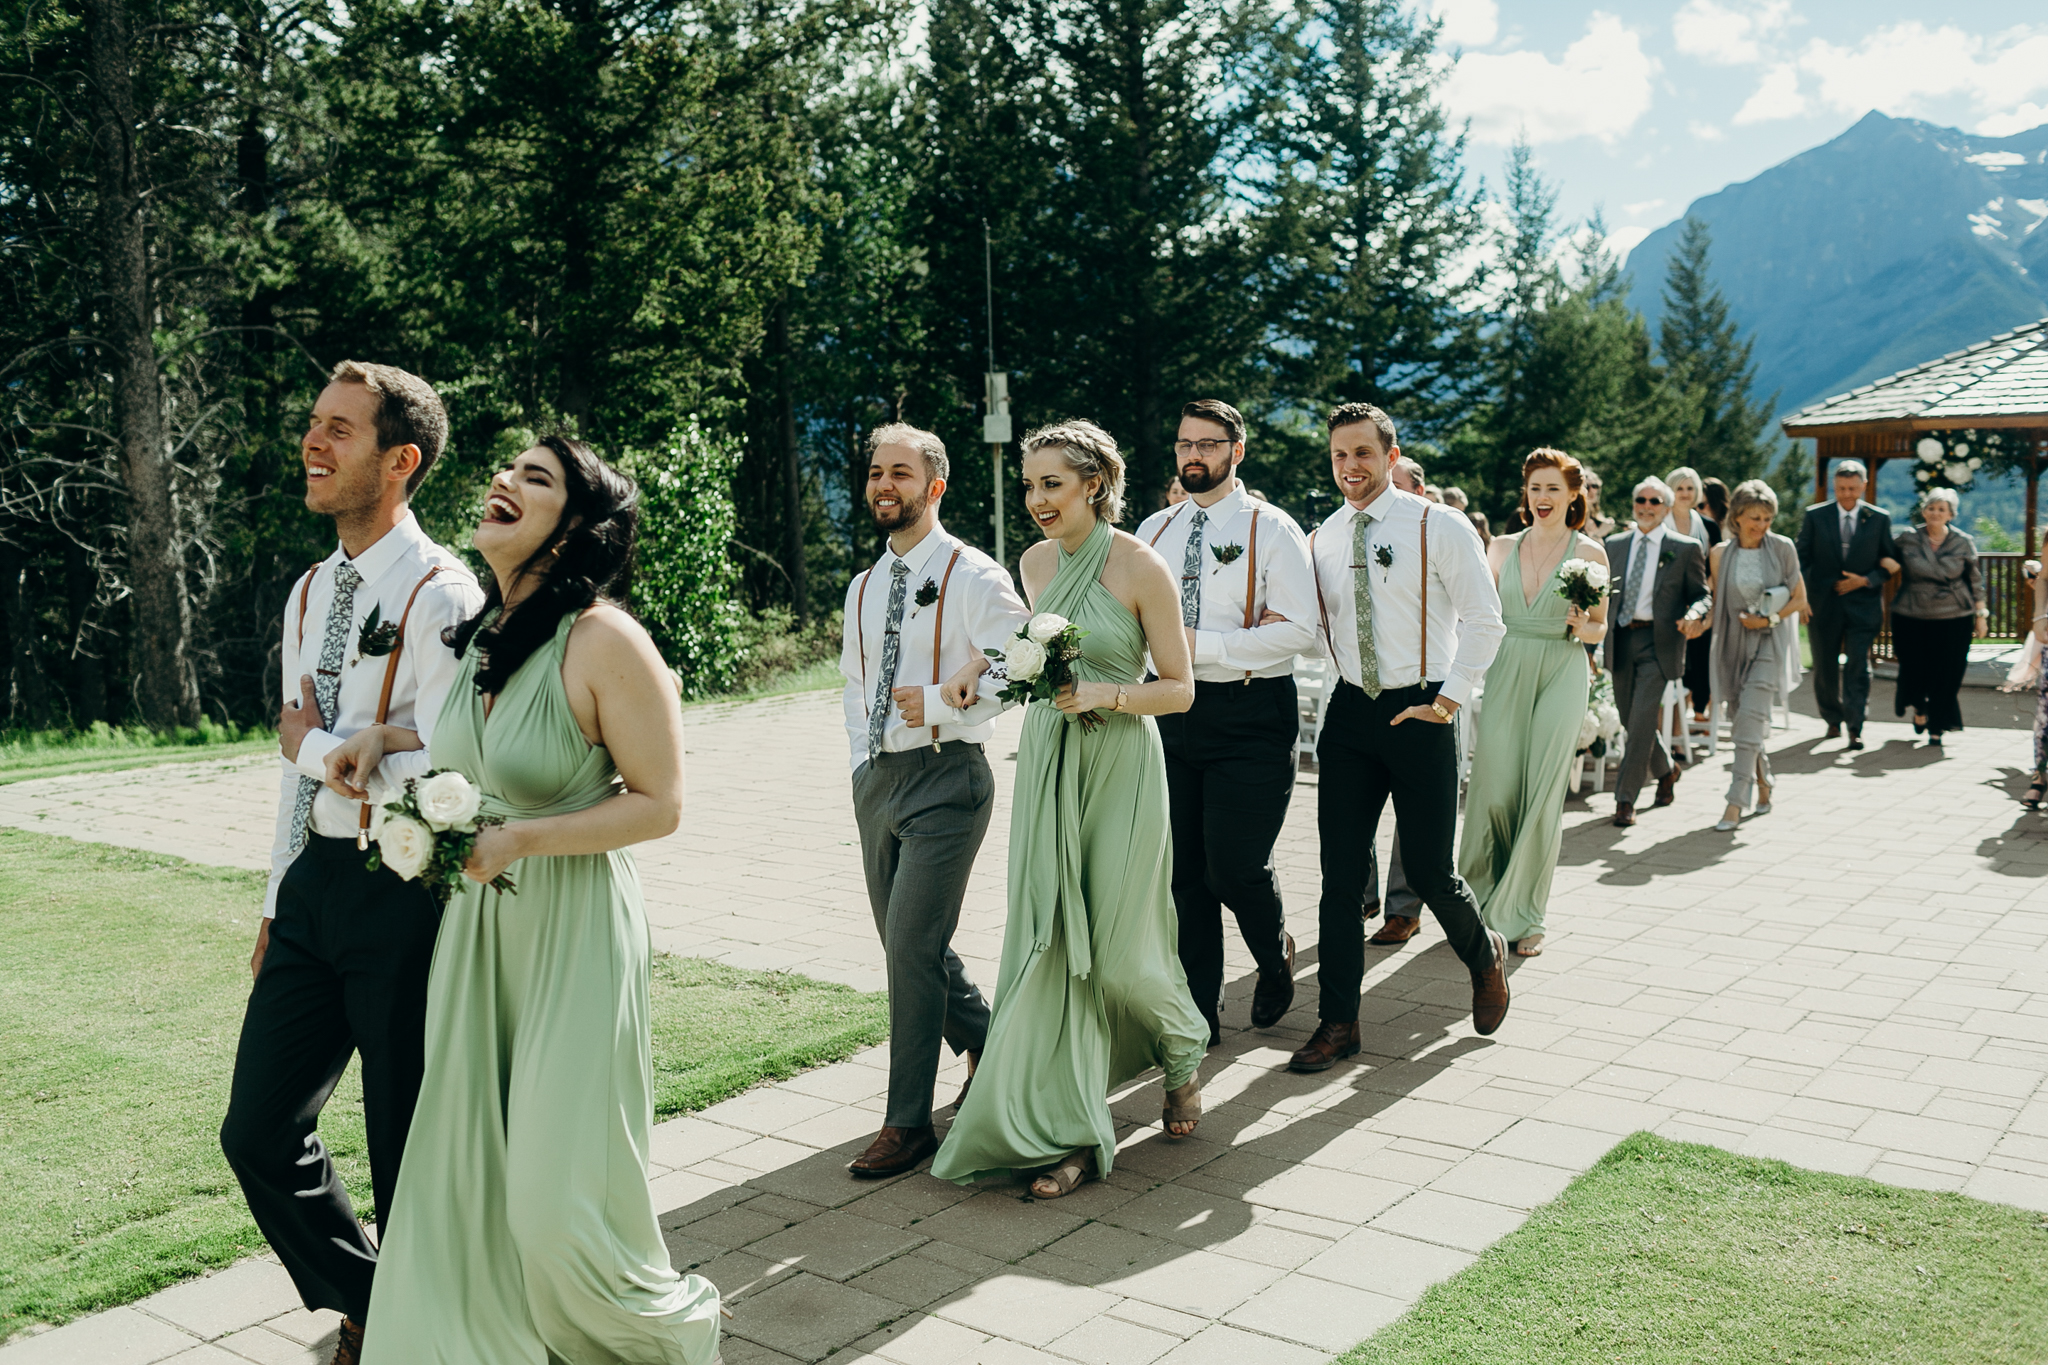 Wedding ceremony at Silvertip Resort rocky mountains Canmore AB destination wedding